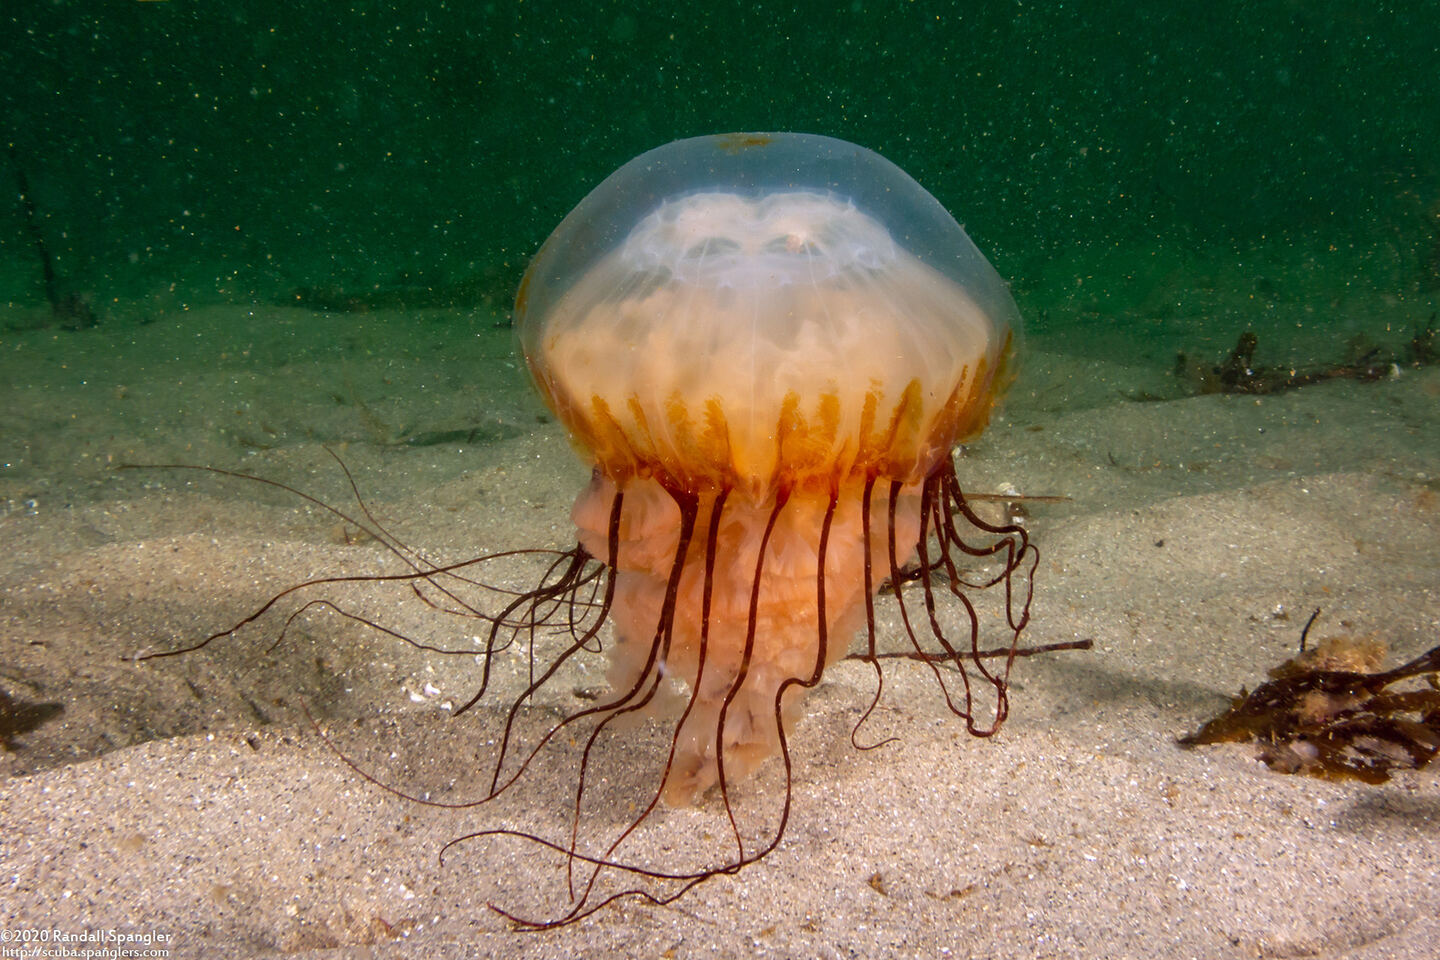 Chrysaora fuscescens (Brown Jellyfish); Brown coating rubbed off of bell, showing internal structure